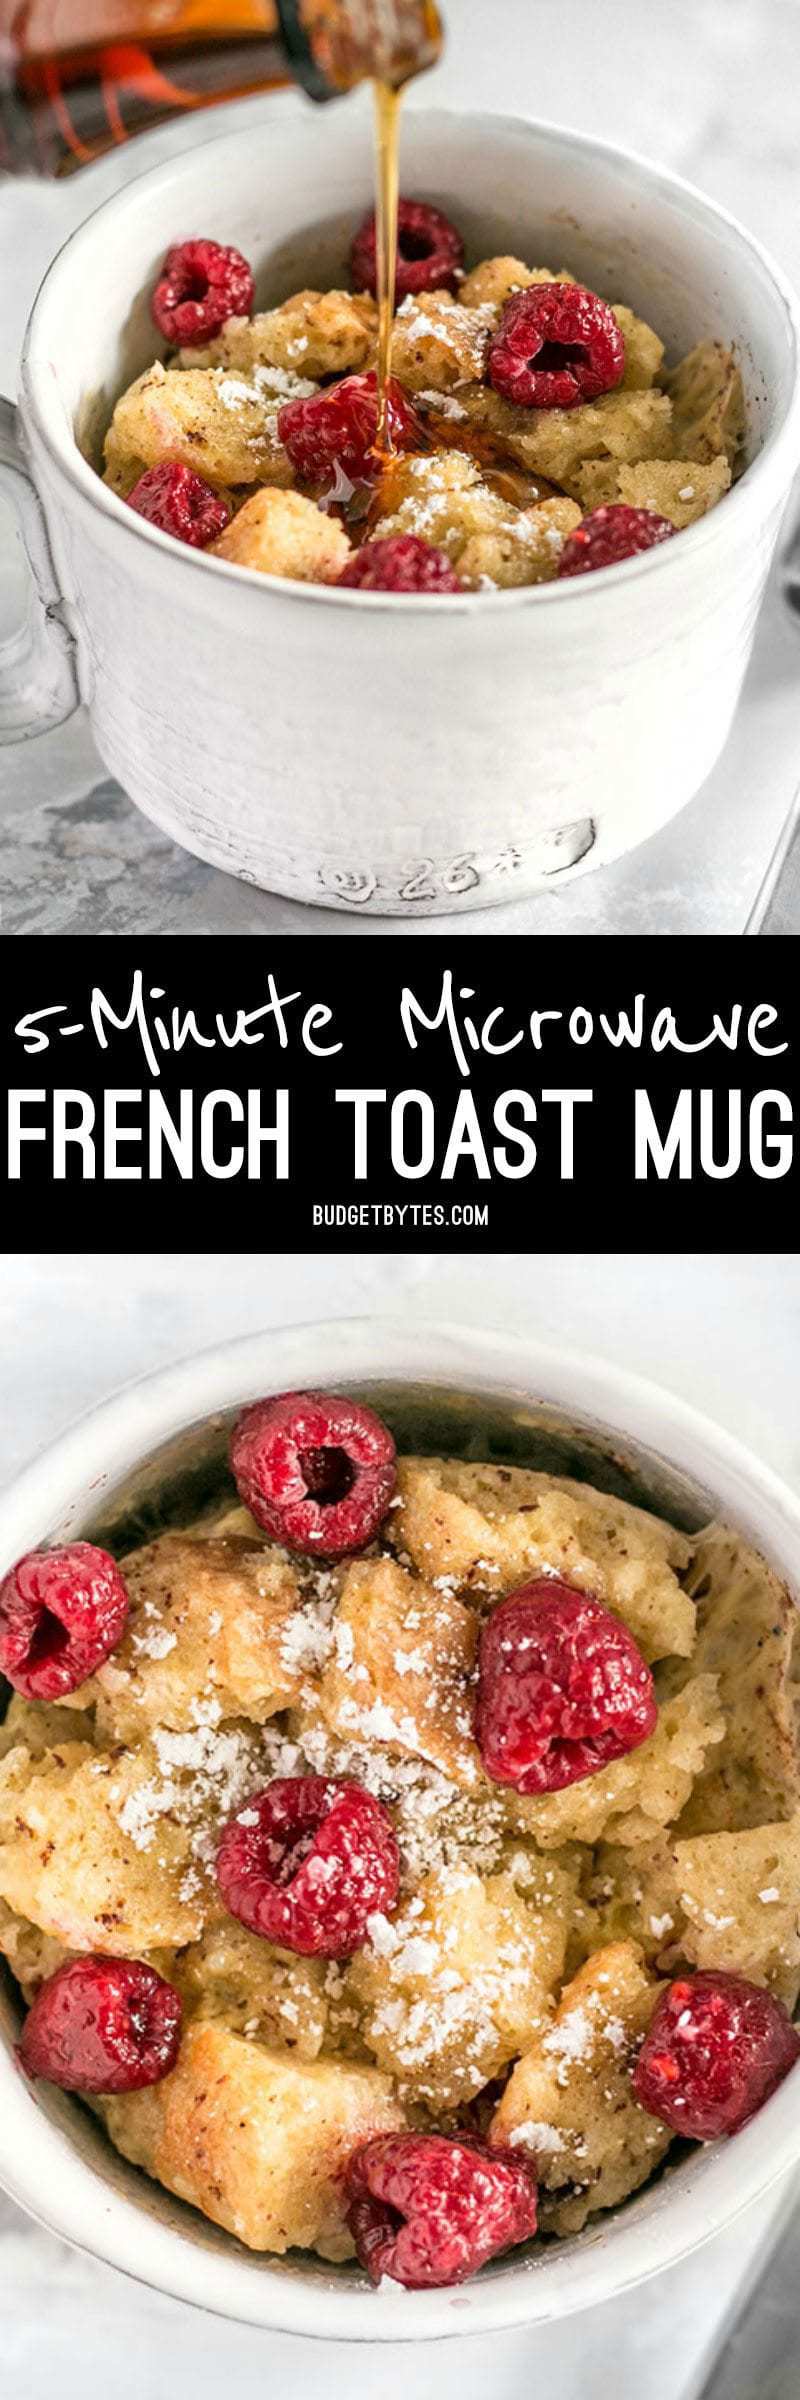 These fast and easy 5-Minute French Toast Mugs are a great single serving breakfast treat plus a way to use leftovers and reduce food waste. BudgetBytes.com